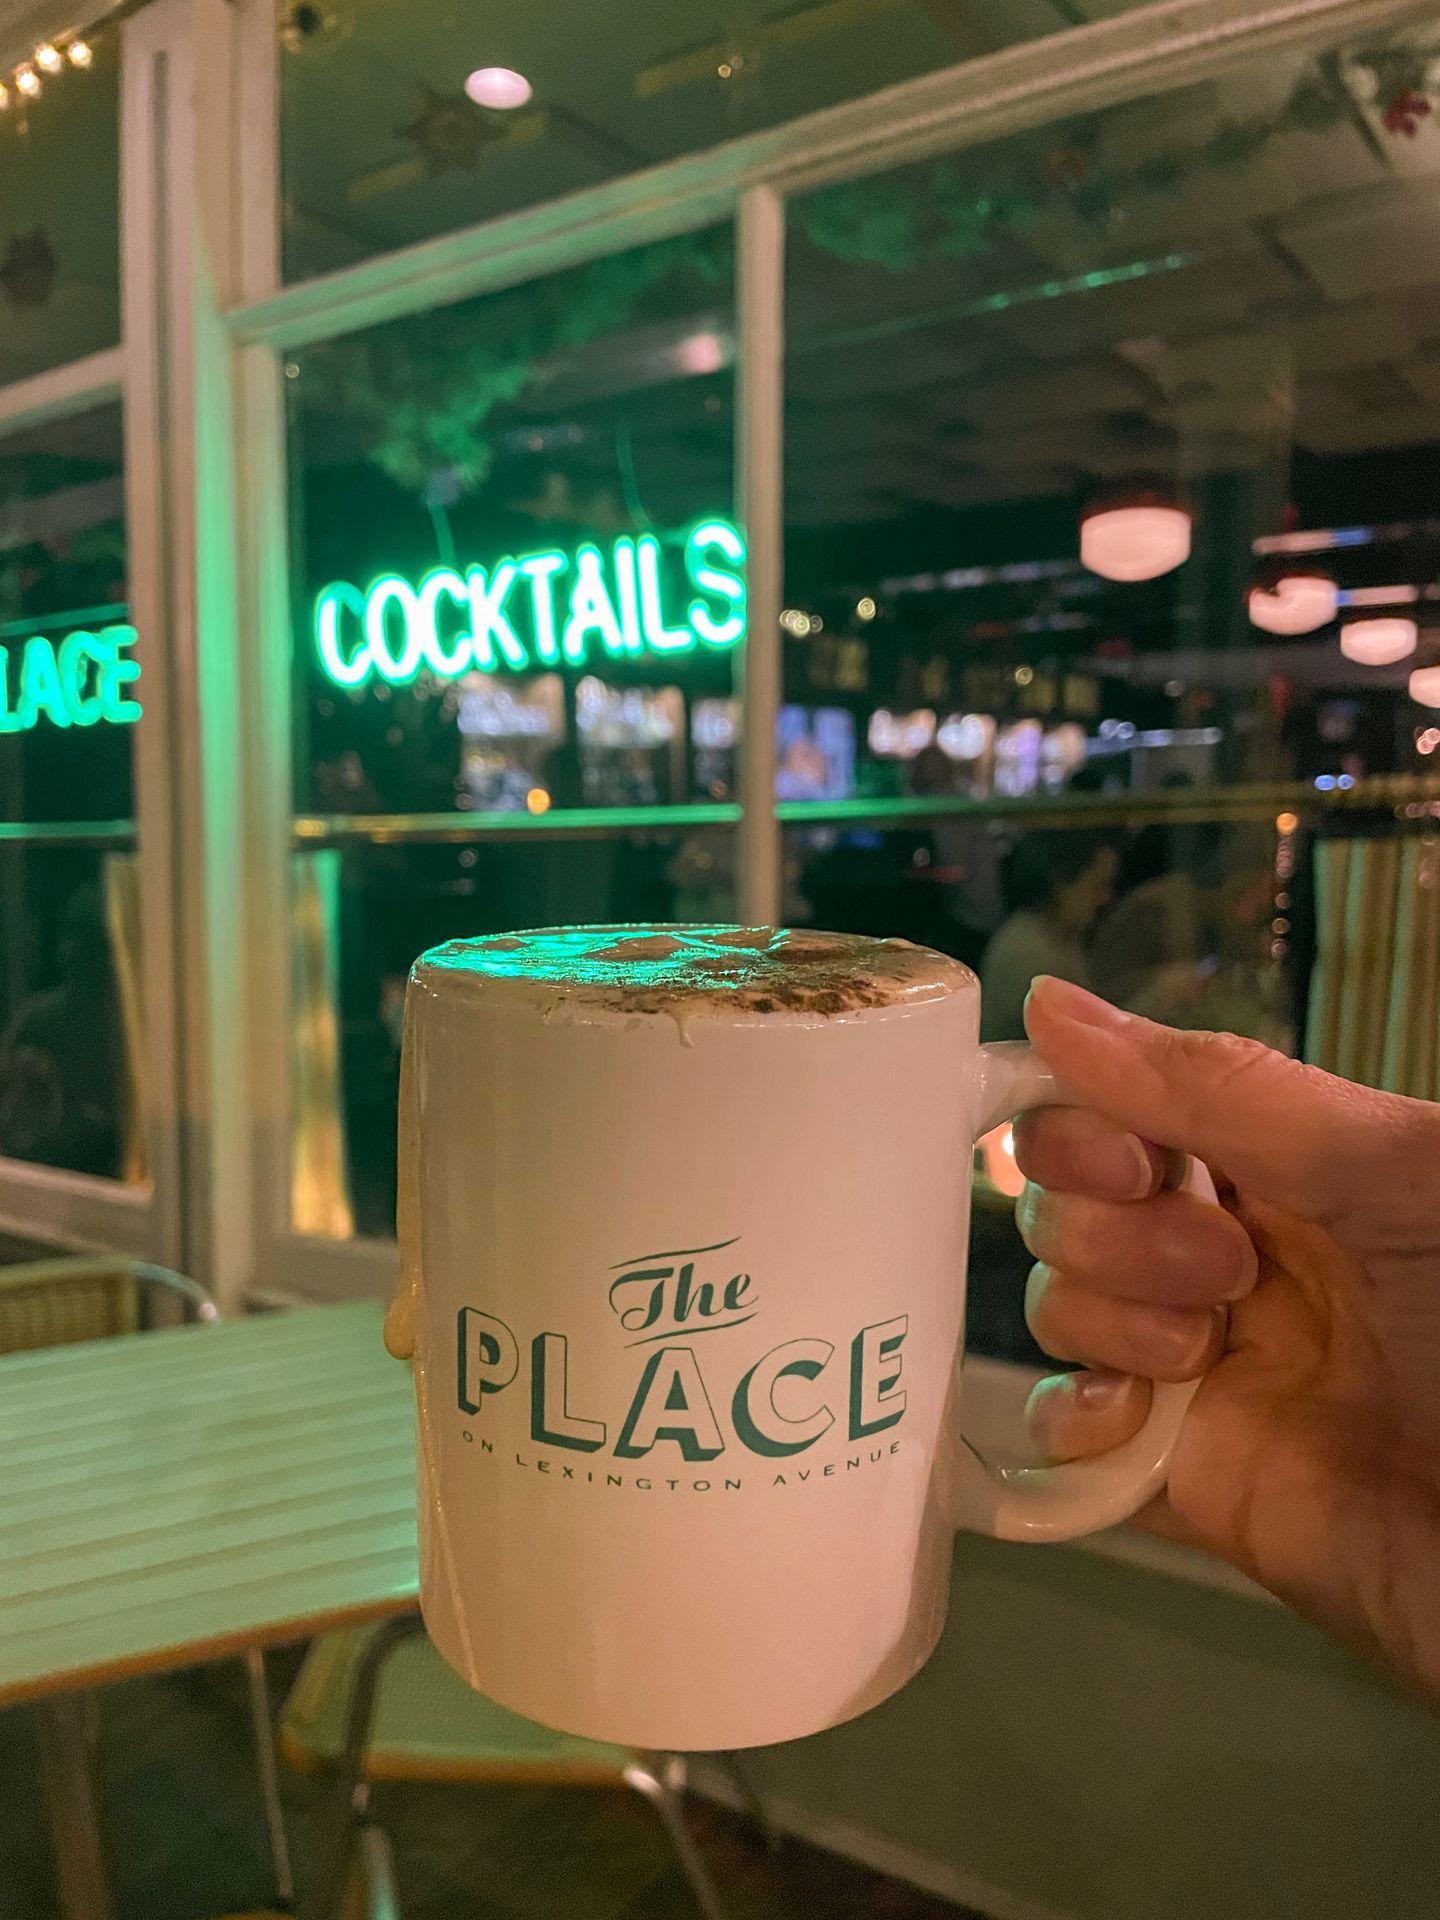 Holding up a mug full of an eggnog cocktail. The white mug reads 'The Place' in green letters.